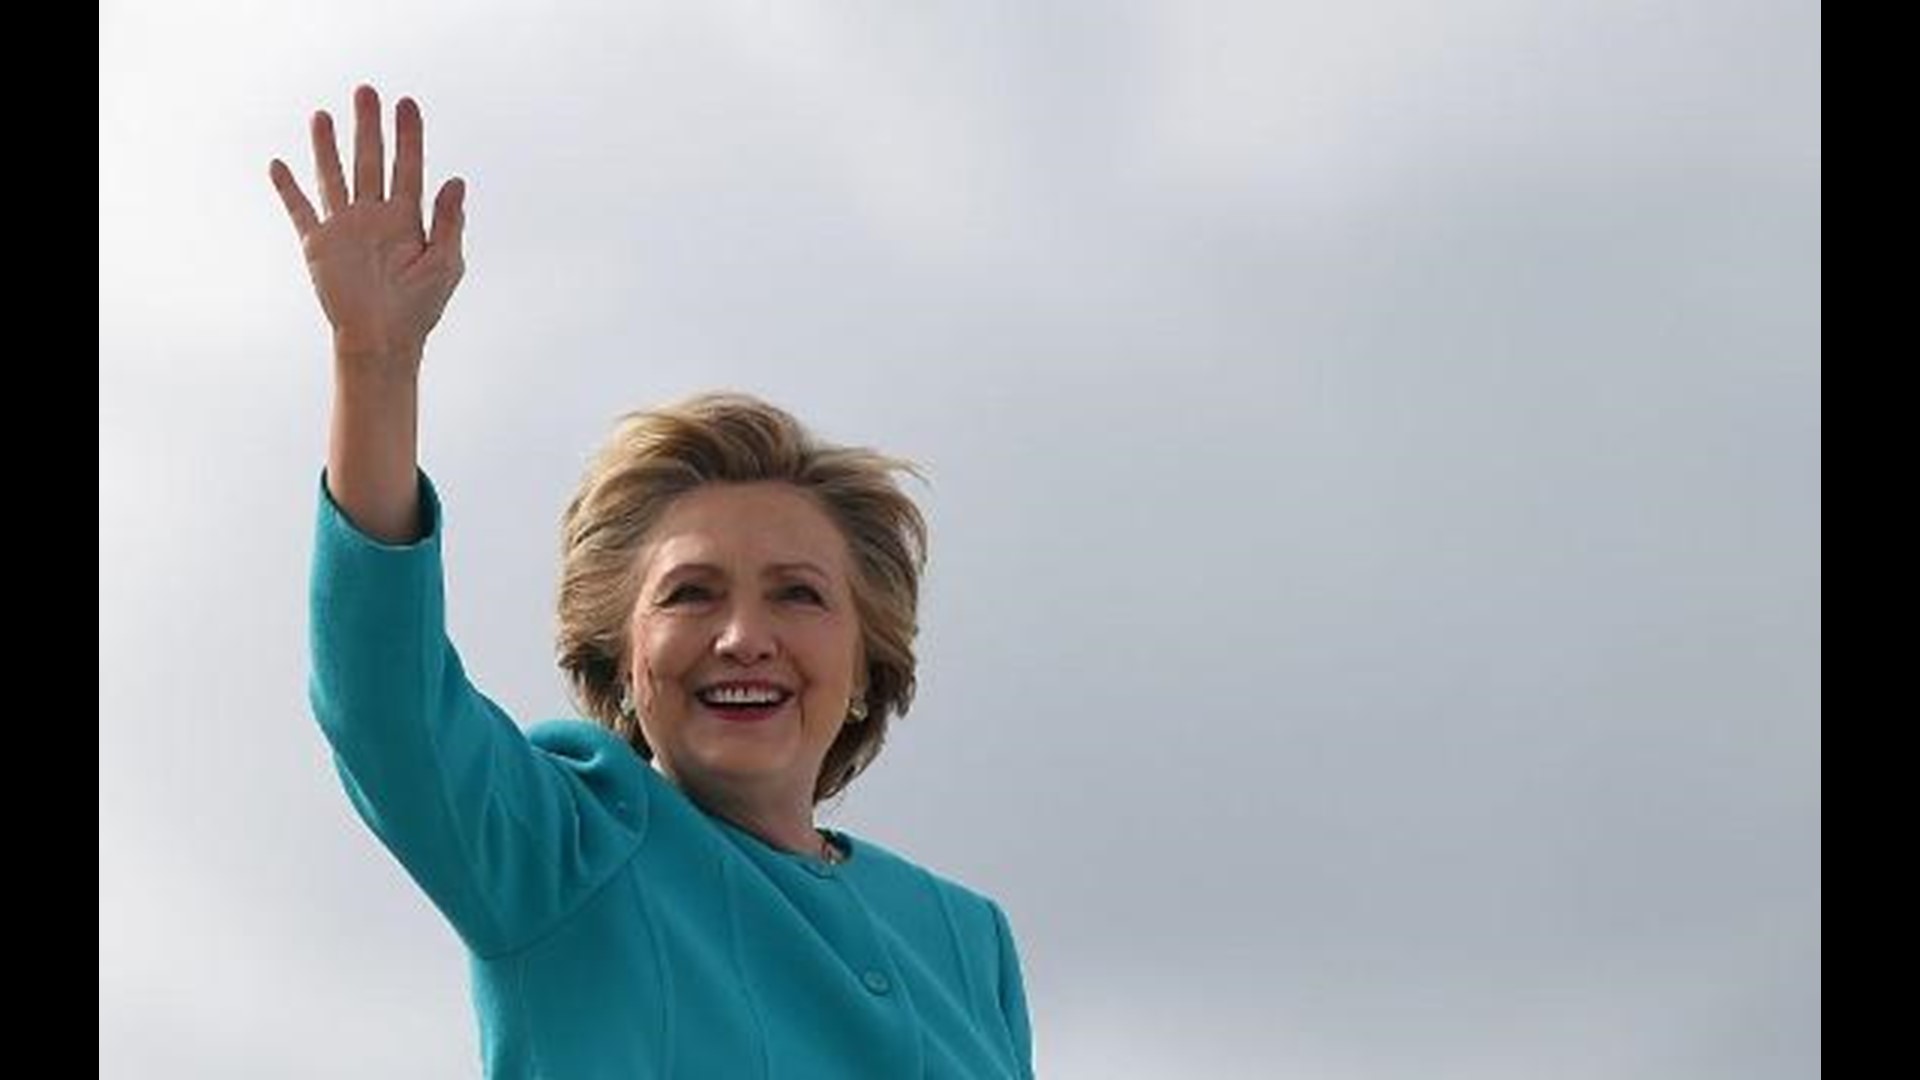 The last national poll conducted by USA TODAY/Suffolk shows Hillary Clinton with nearly a ten point lead in a two-way race with Donald Trump. USA TODAY, Collin Brennan